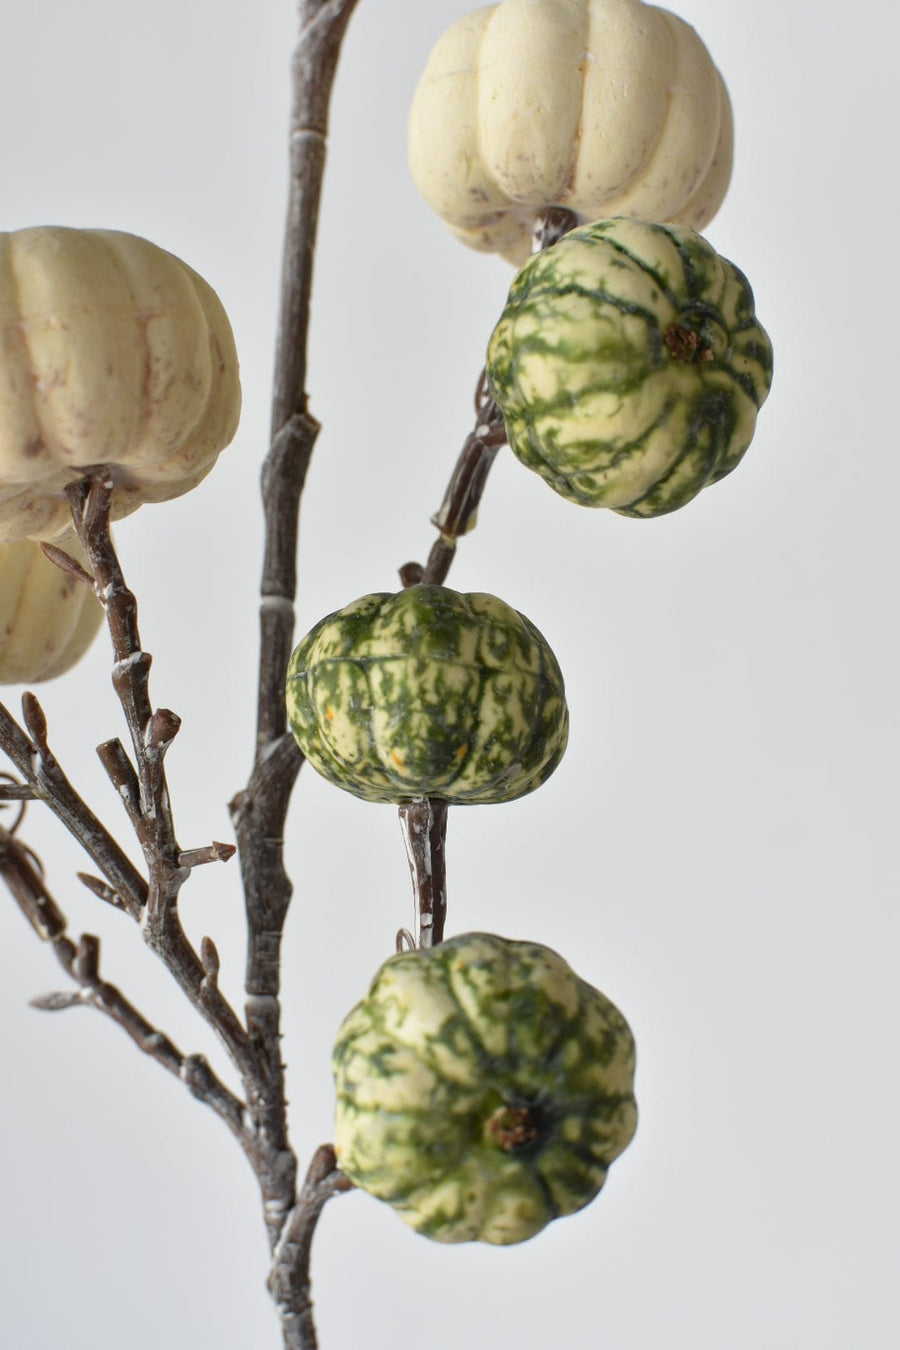 29" Faux White-Washed Pumkins On A Branch: Cream + Green